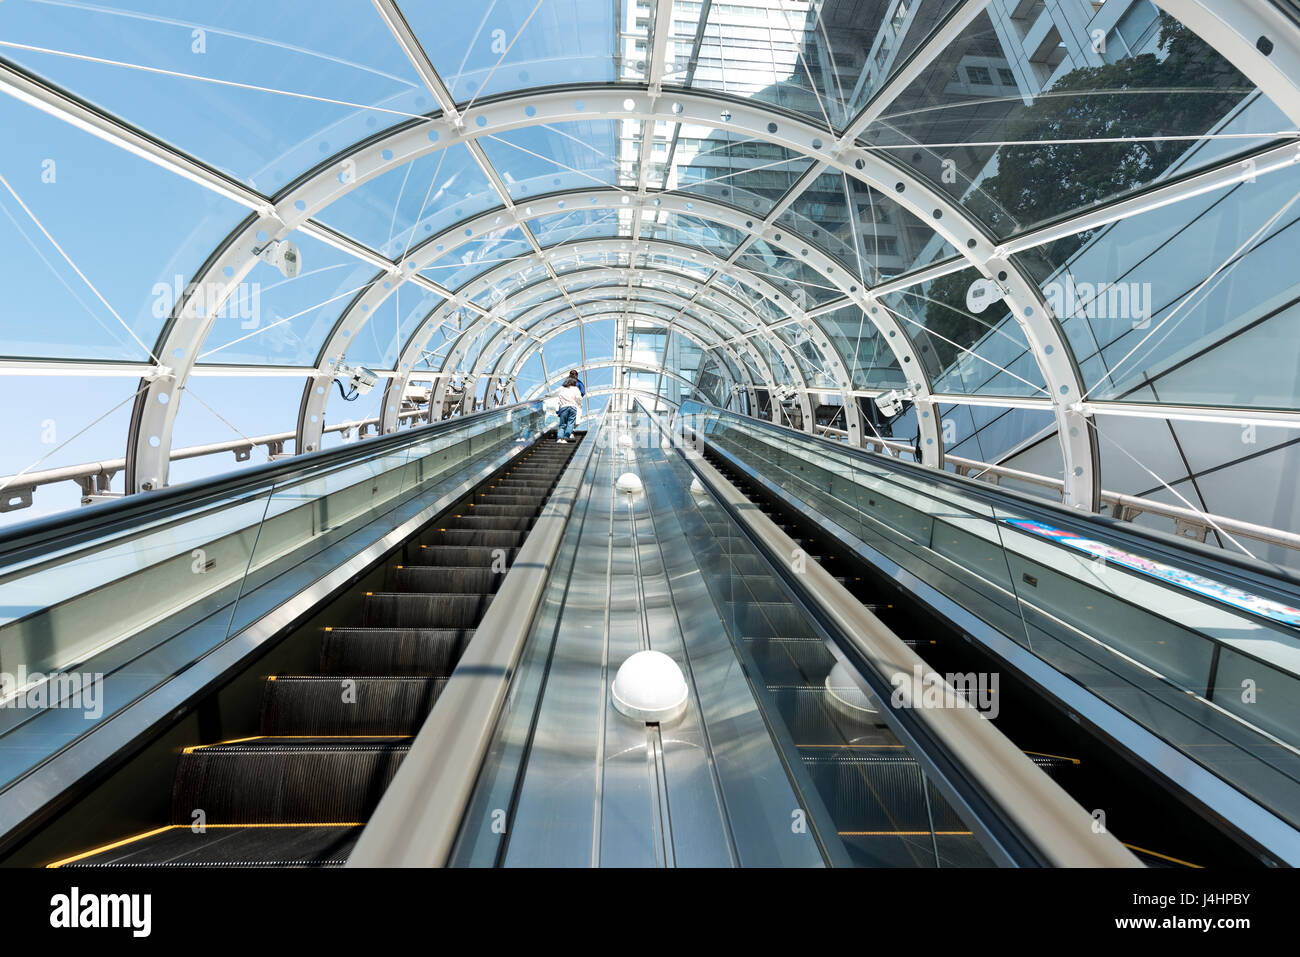 View of the spectacular escalator in Japan Building, a modern high rise skyscraper in the Tokyo in Japan. Stock Photo